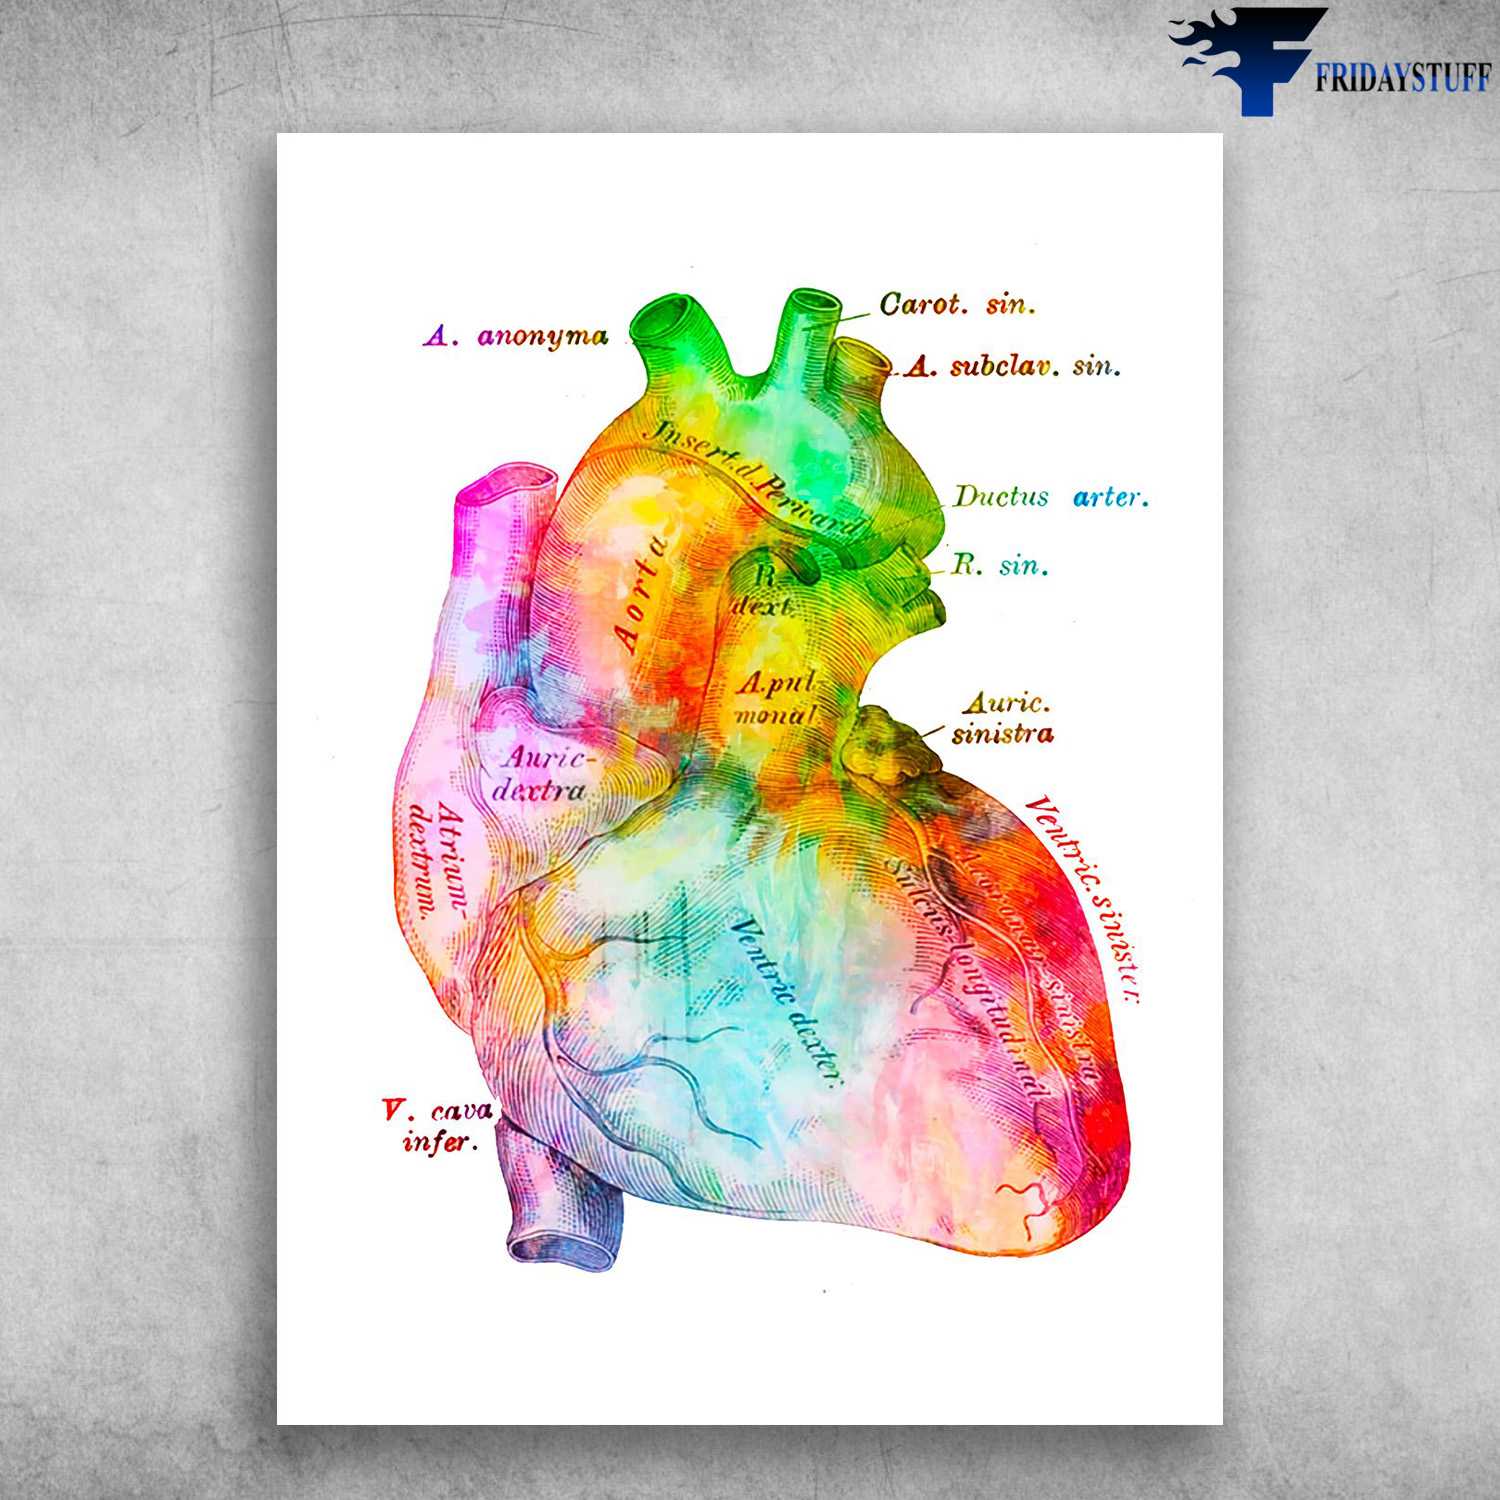 Heart Poster, Colorful Heart, Heart Structure